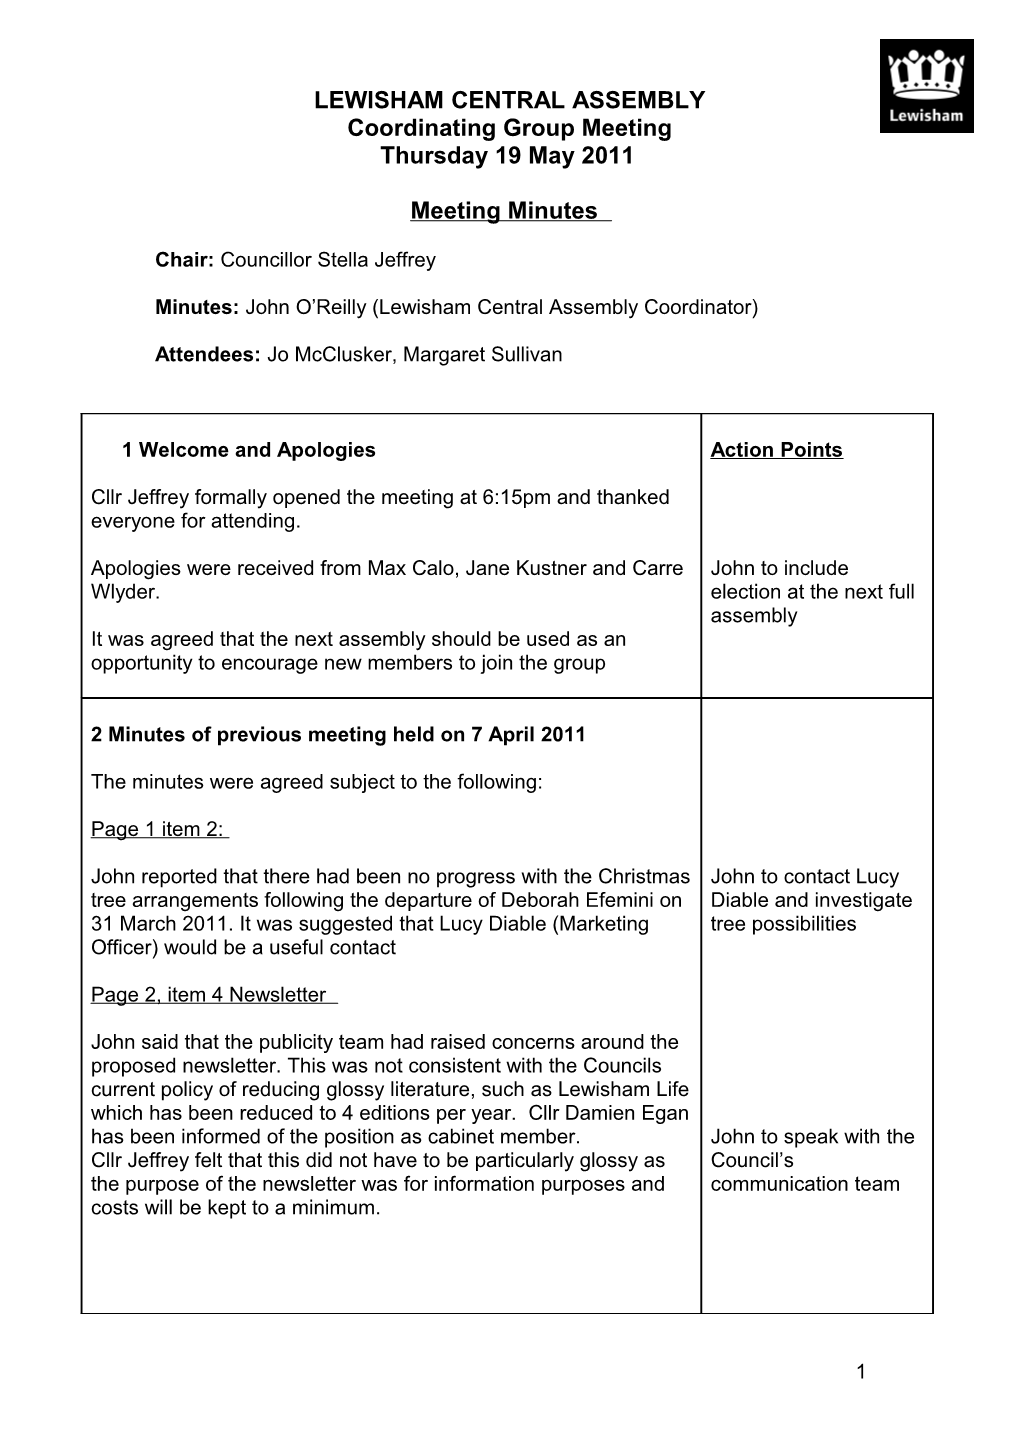 Lewisham Central Assembly Coordinating Group 19 May 2011